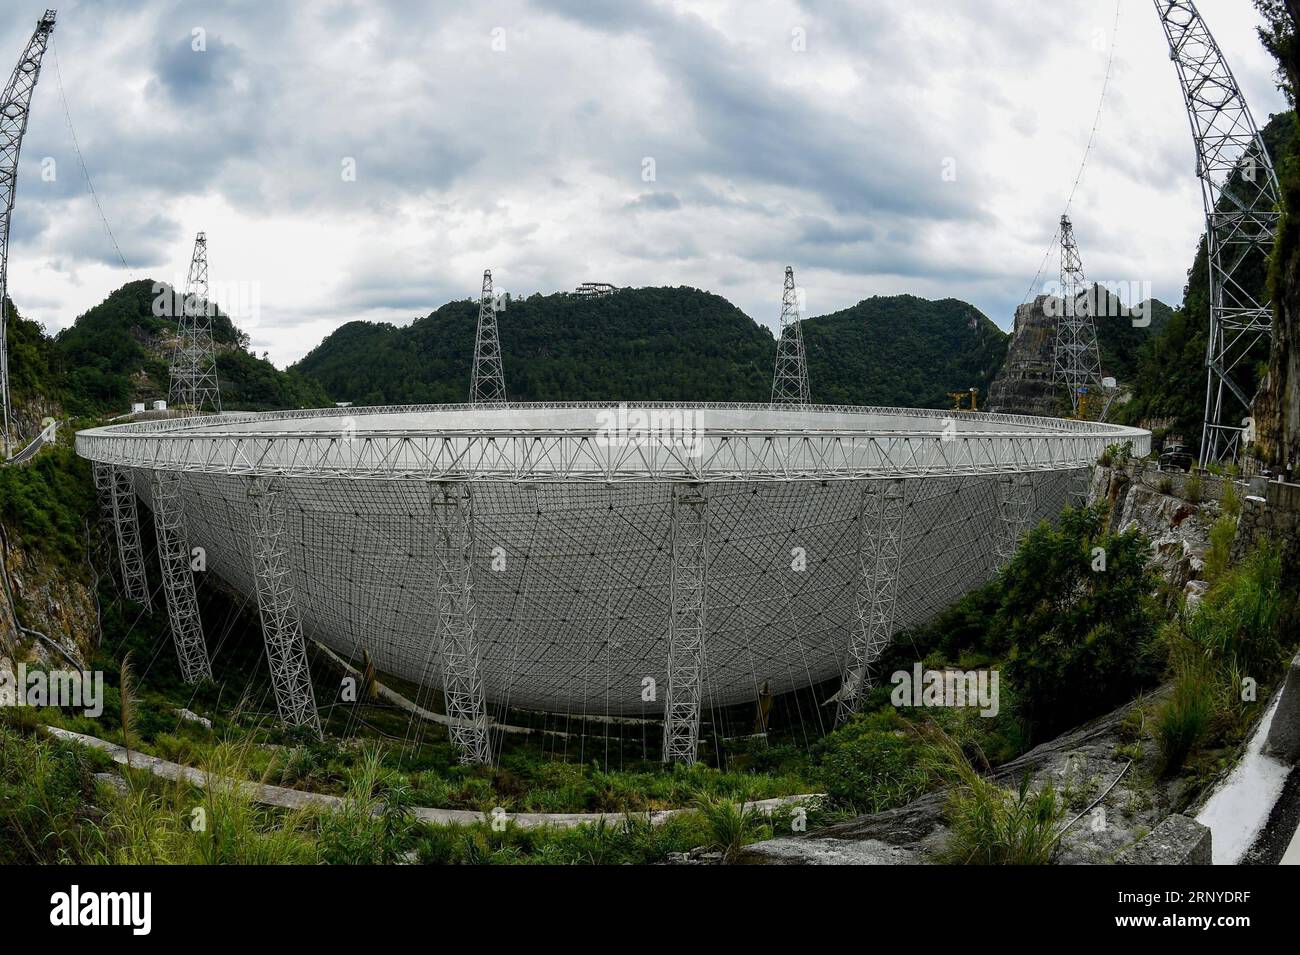 (180313) -- GUIYANG, March 13, 2018 -- File photo taken on Aug. 9, 2017, shows the Five-hundred-meter Aperture Spherical Radio Telescope (FAST) in Pingtang County, southwest China s Guizhou Province. China s FAST, the world s largest single-dish radio telescope, has discovered 11 new pulsars so far, the National Astronomical Observatories of China (NAOC) said Tuesday. )(wsw) CHINA-GUIZHOU-FAST-11 NEW PULSARS (CN) OuxDongqu PUBLICATIONxNOTxINxCHN Stock Photo